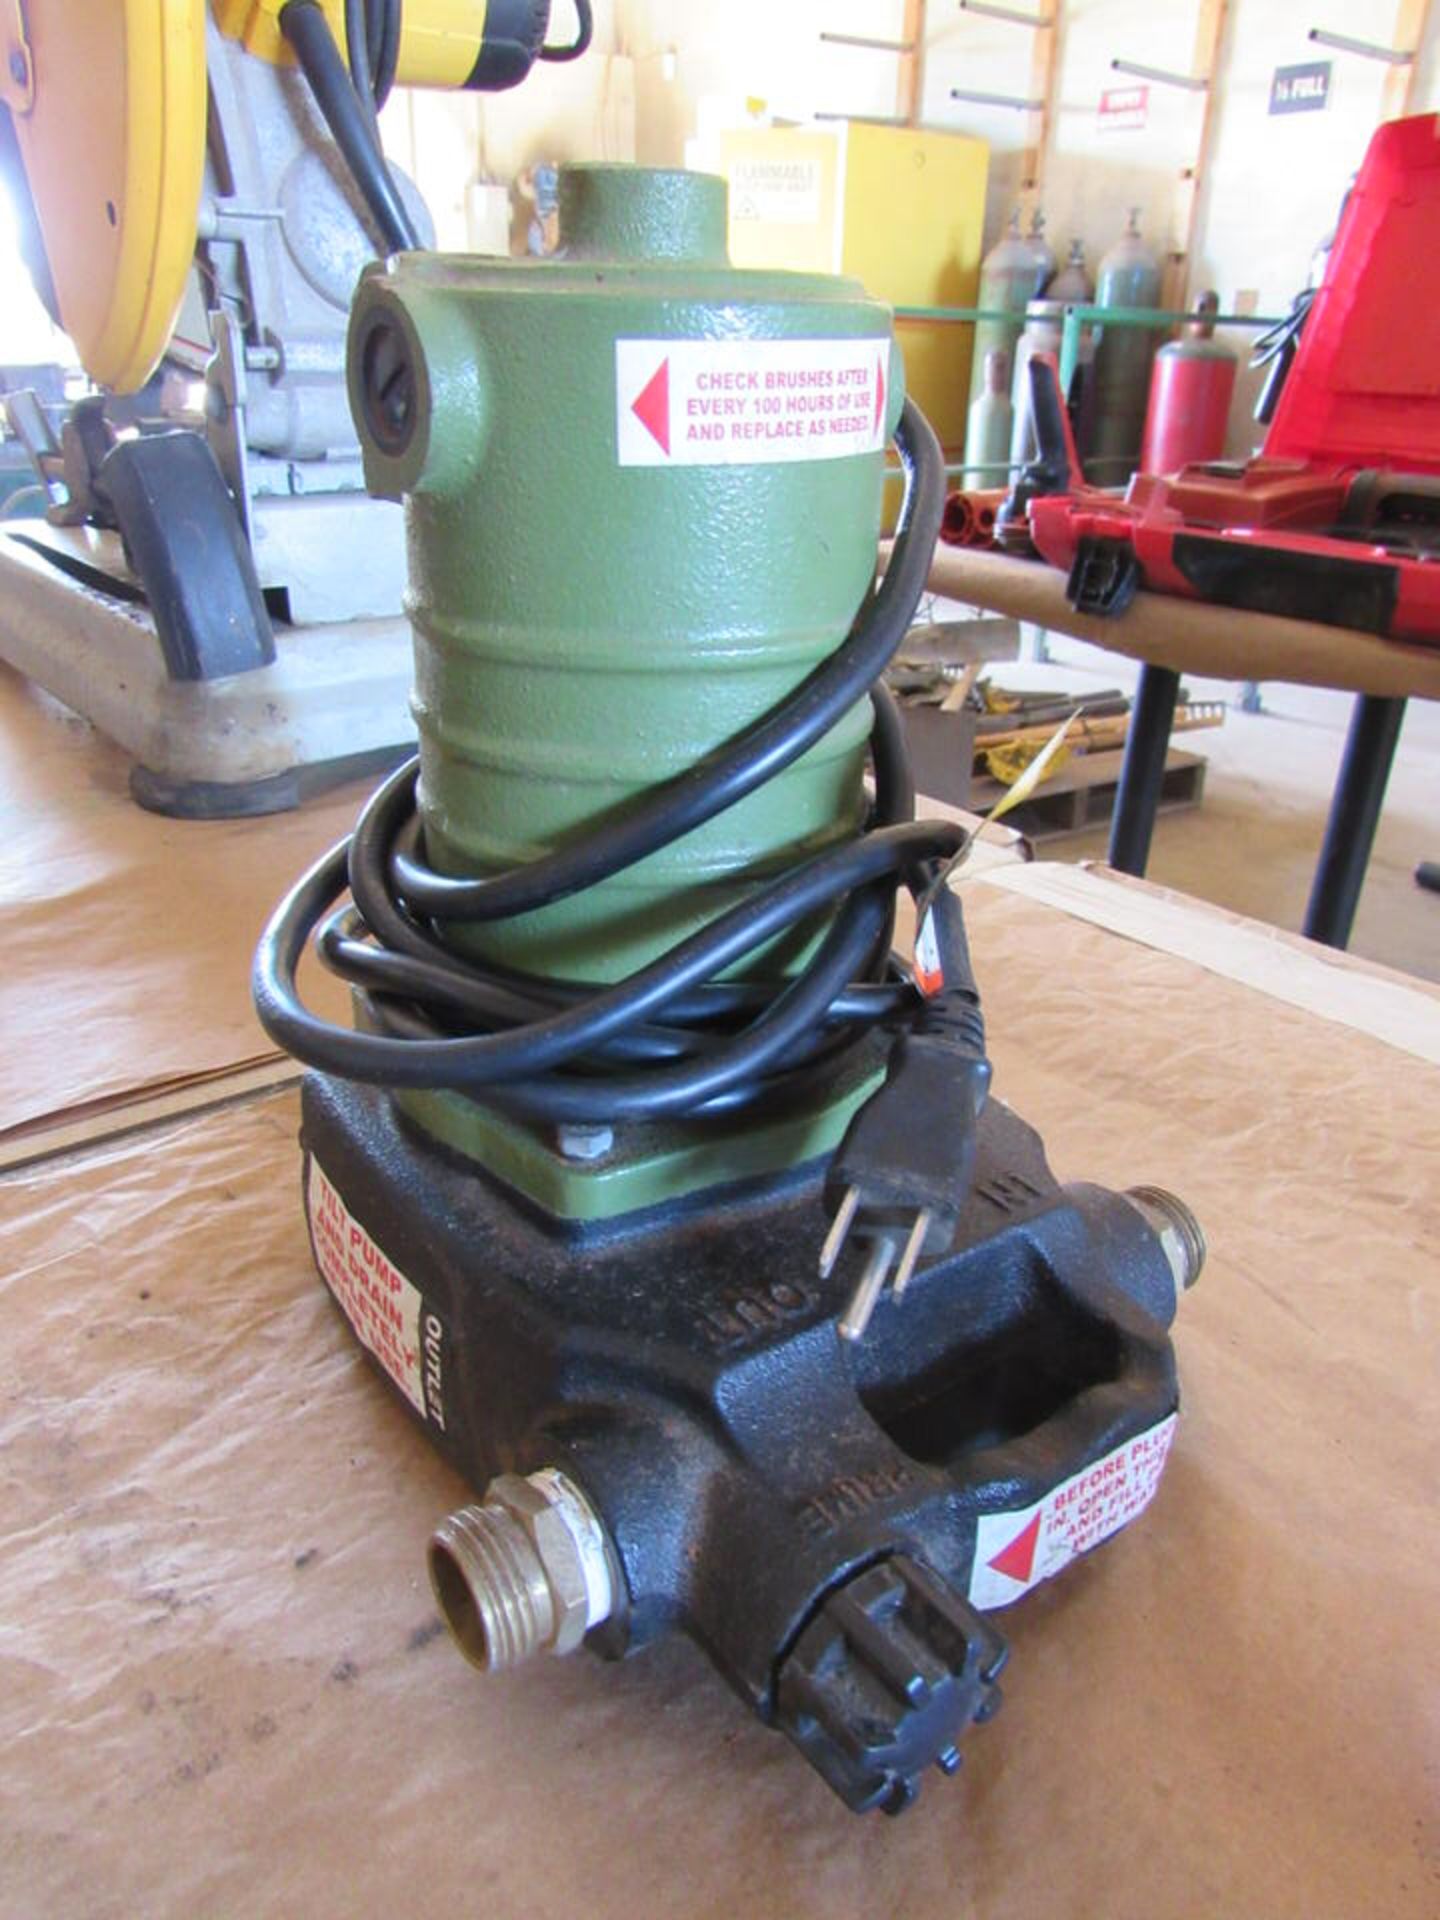 One Drumond 1/2 HP Non-Submersible Transfer Pump, S/N 3418-37378